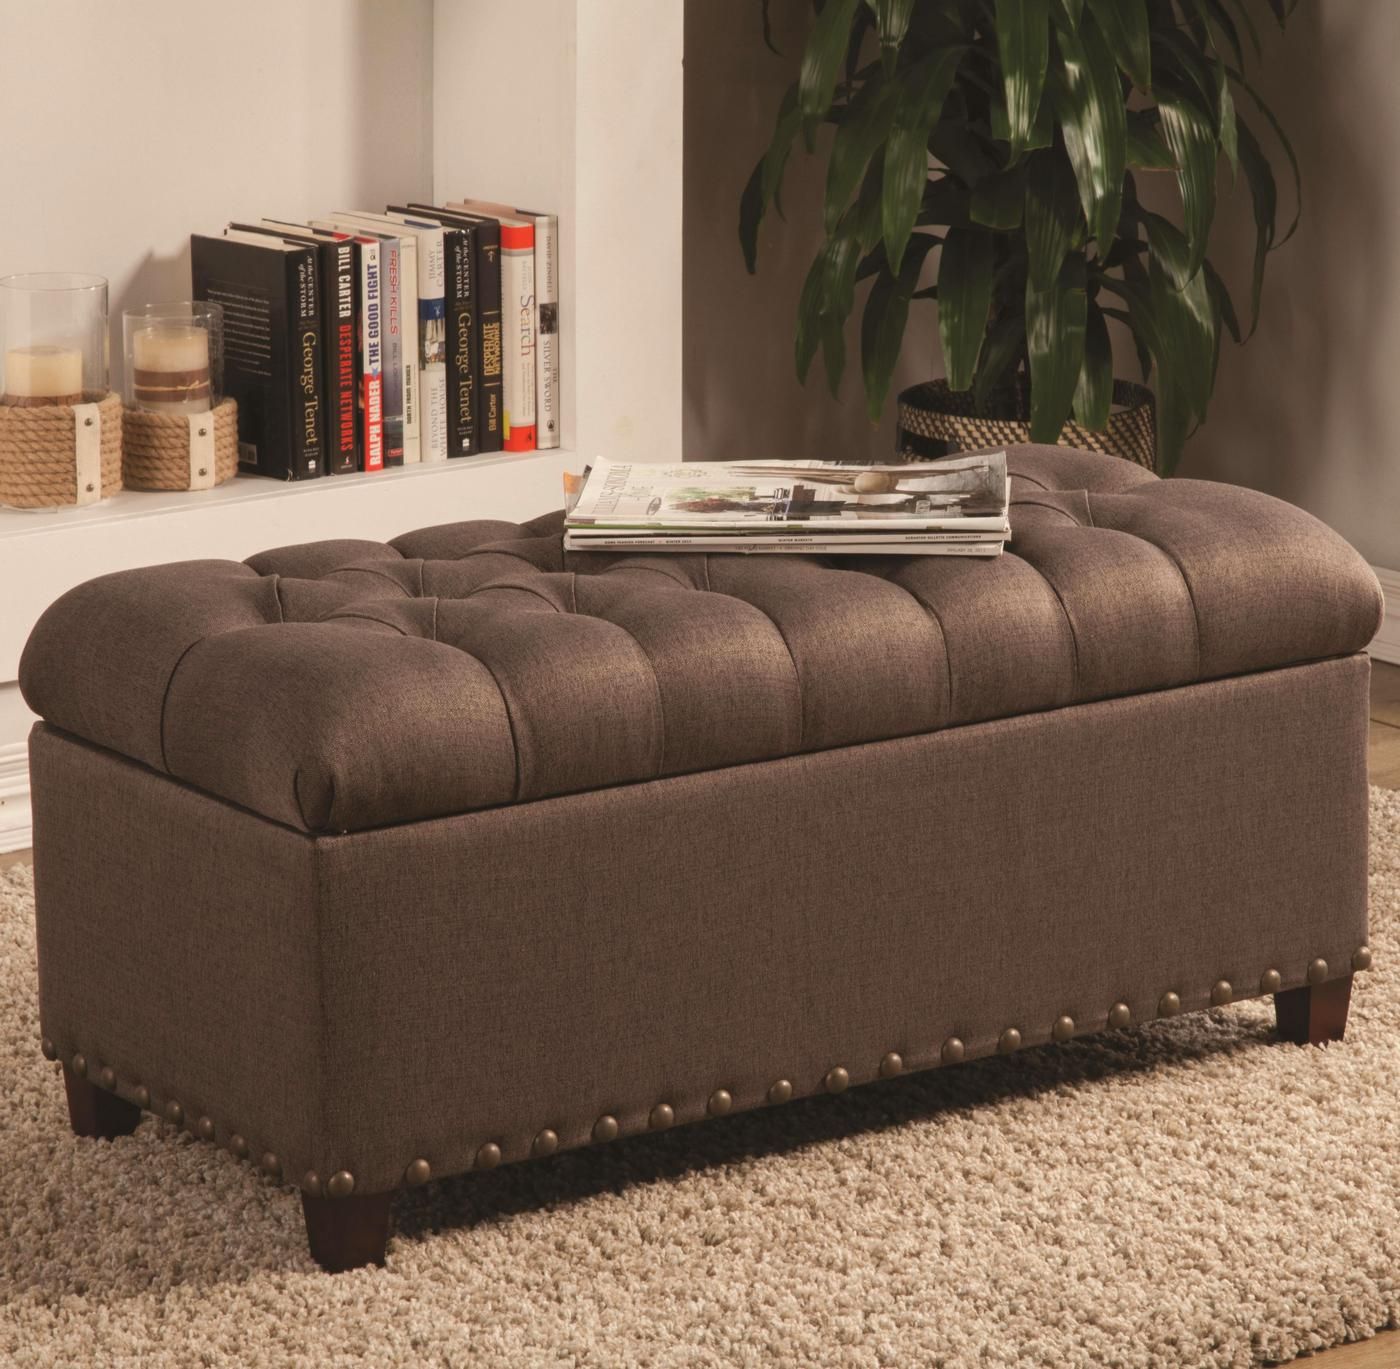 Warm Brown Tone Fabric Ottoman Tufted Storage Bench Within Brown And Gray Button Tufted Ottomans (View 15 of 20)